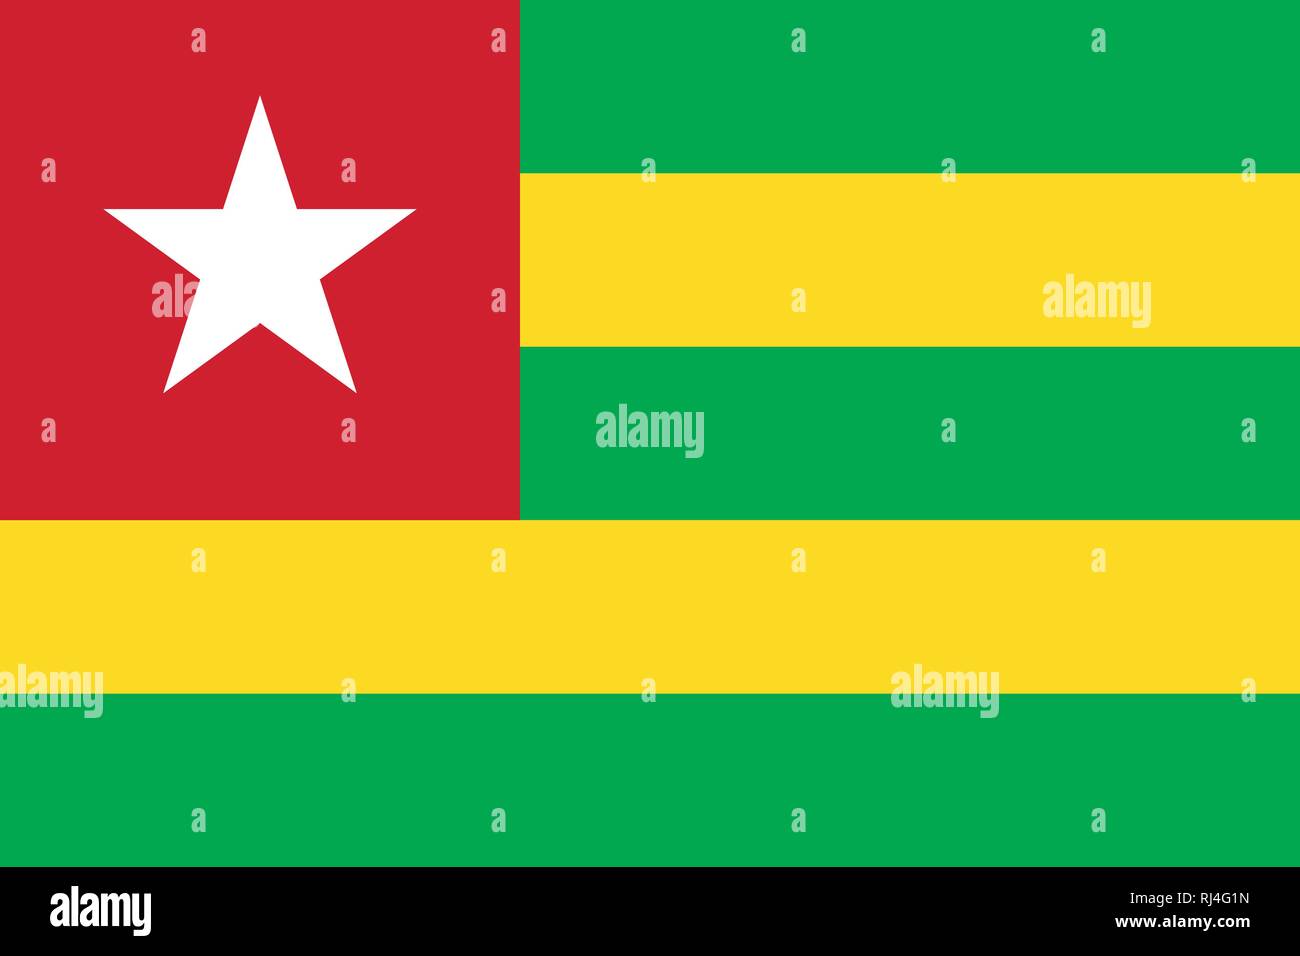 Vector Image of Togo Flag. Based on the official and exact Togo flag dimensions (3:2) & colors (354C, 115C, 186C, and White) Stock Vector